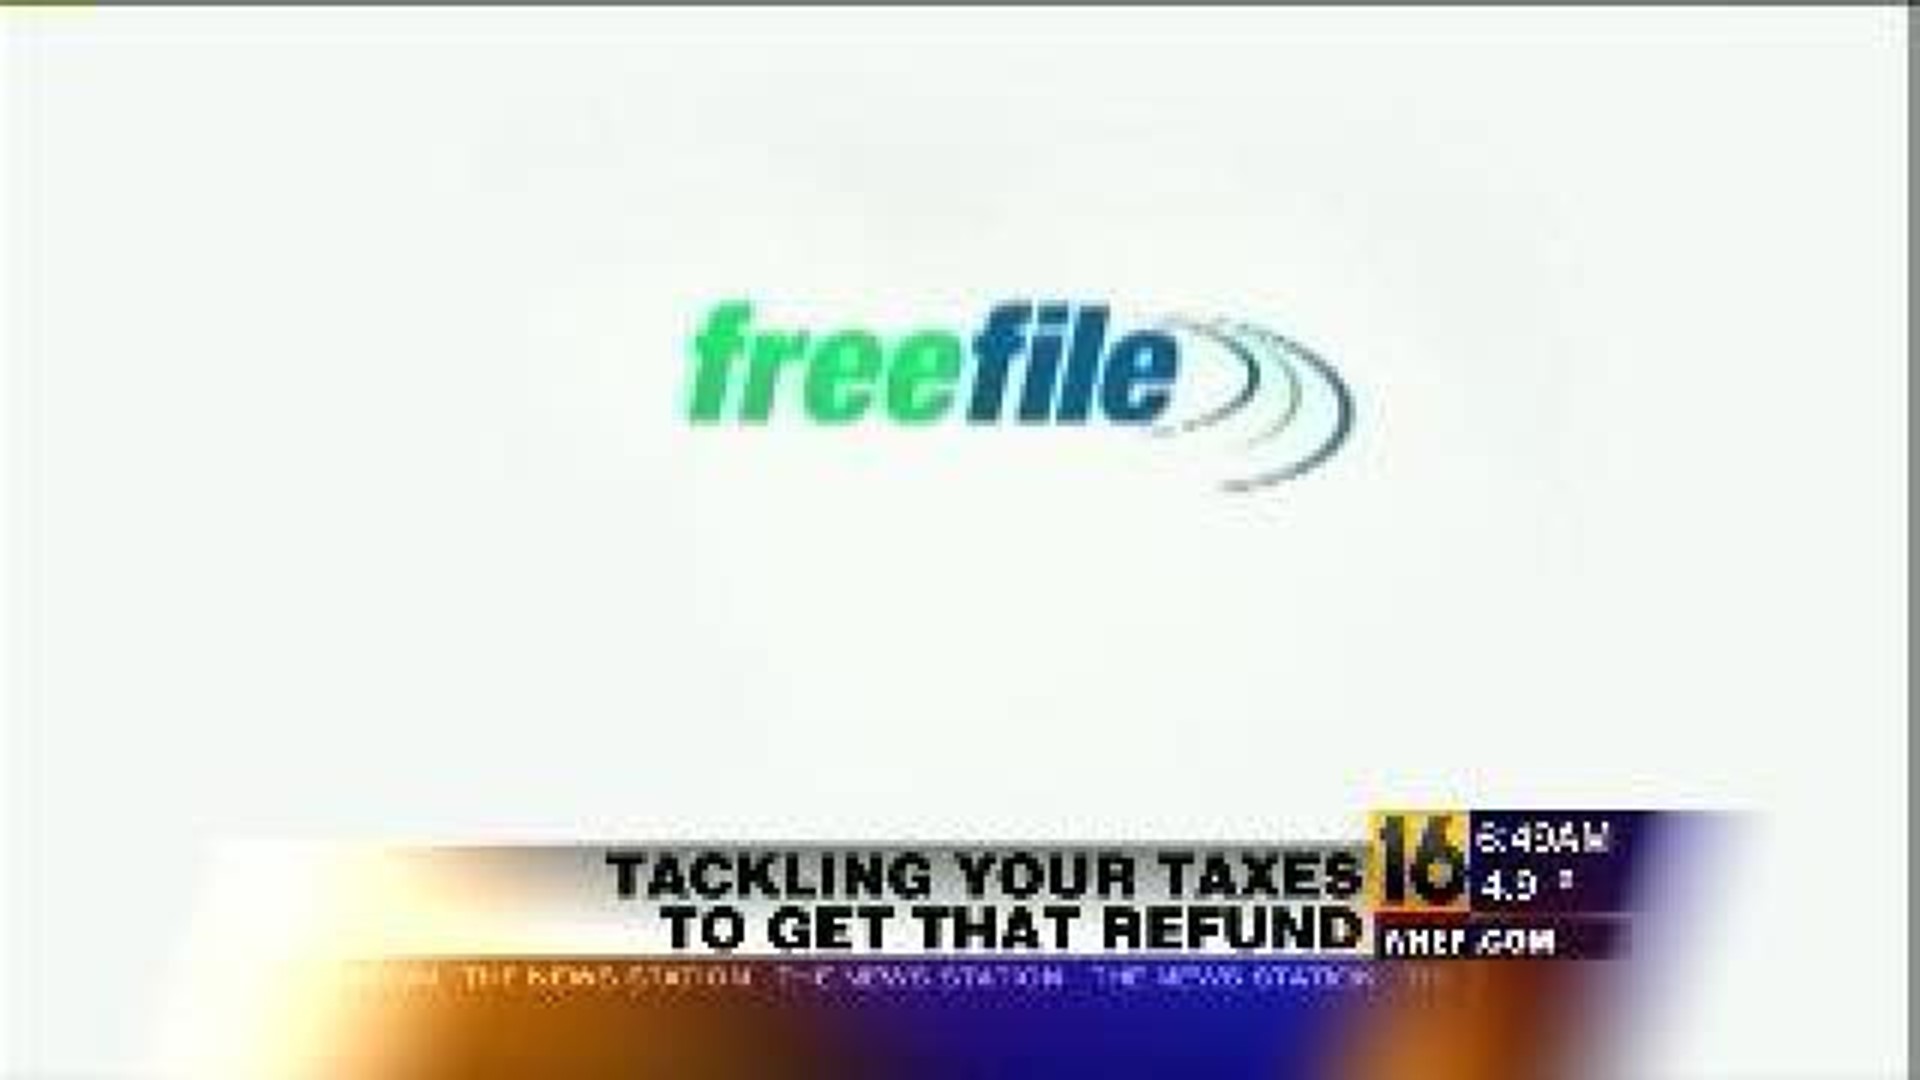 Tax Tips: Getting That Refund Faster